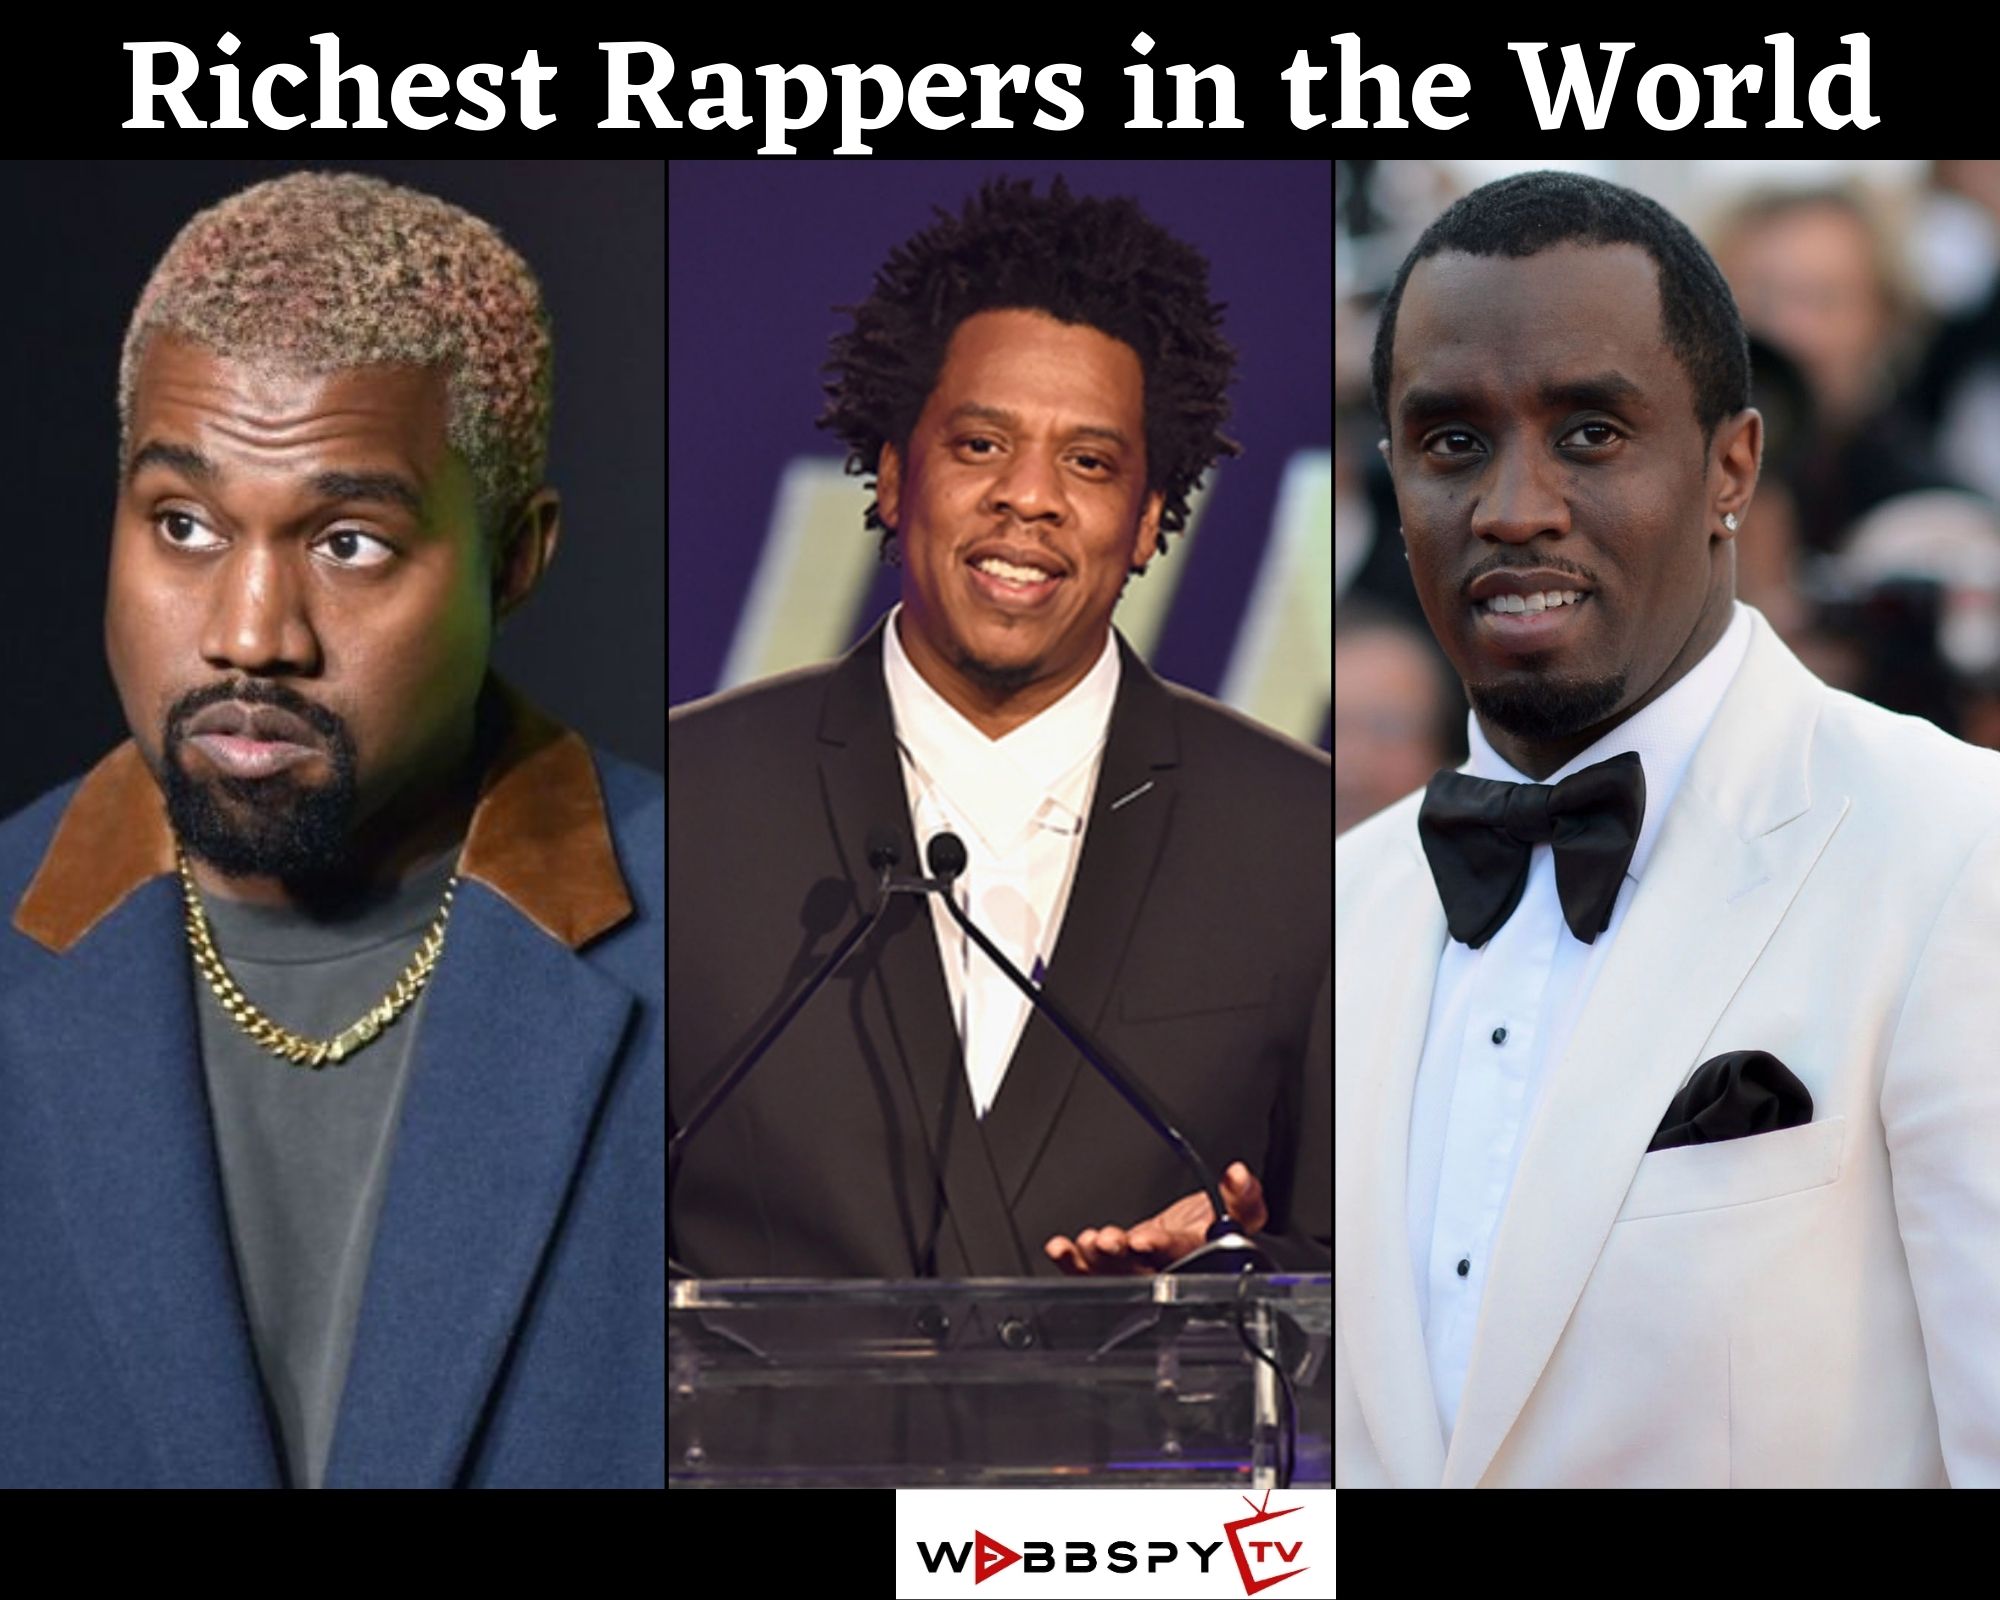 Top 10 Richest Rappers in the World in 2021 (Forbes)